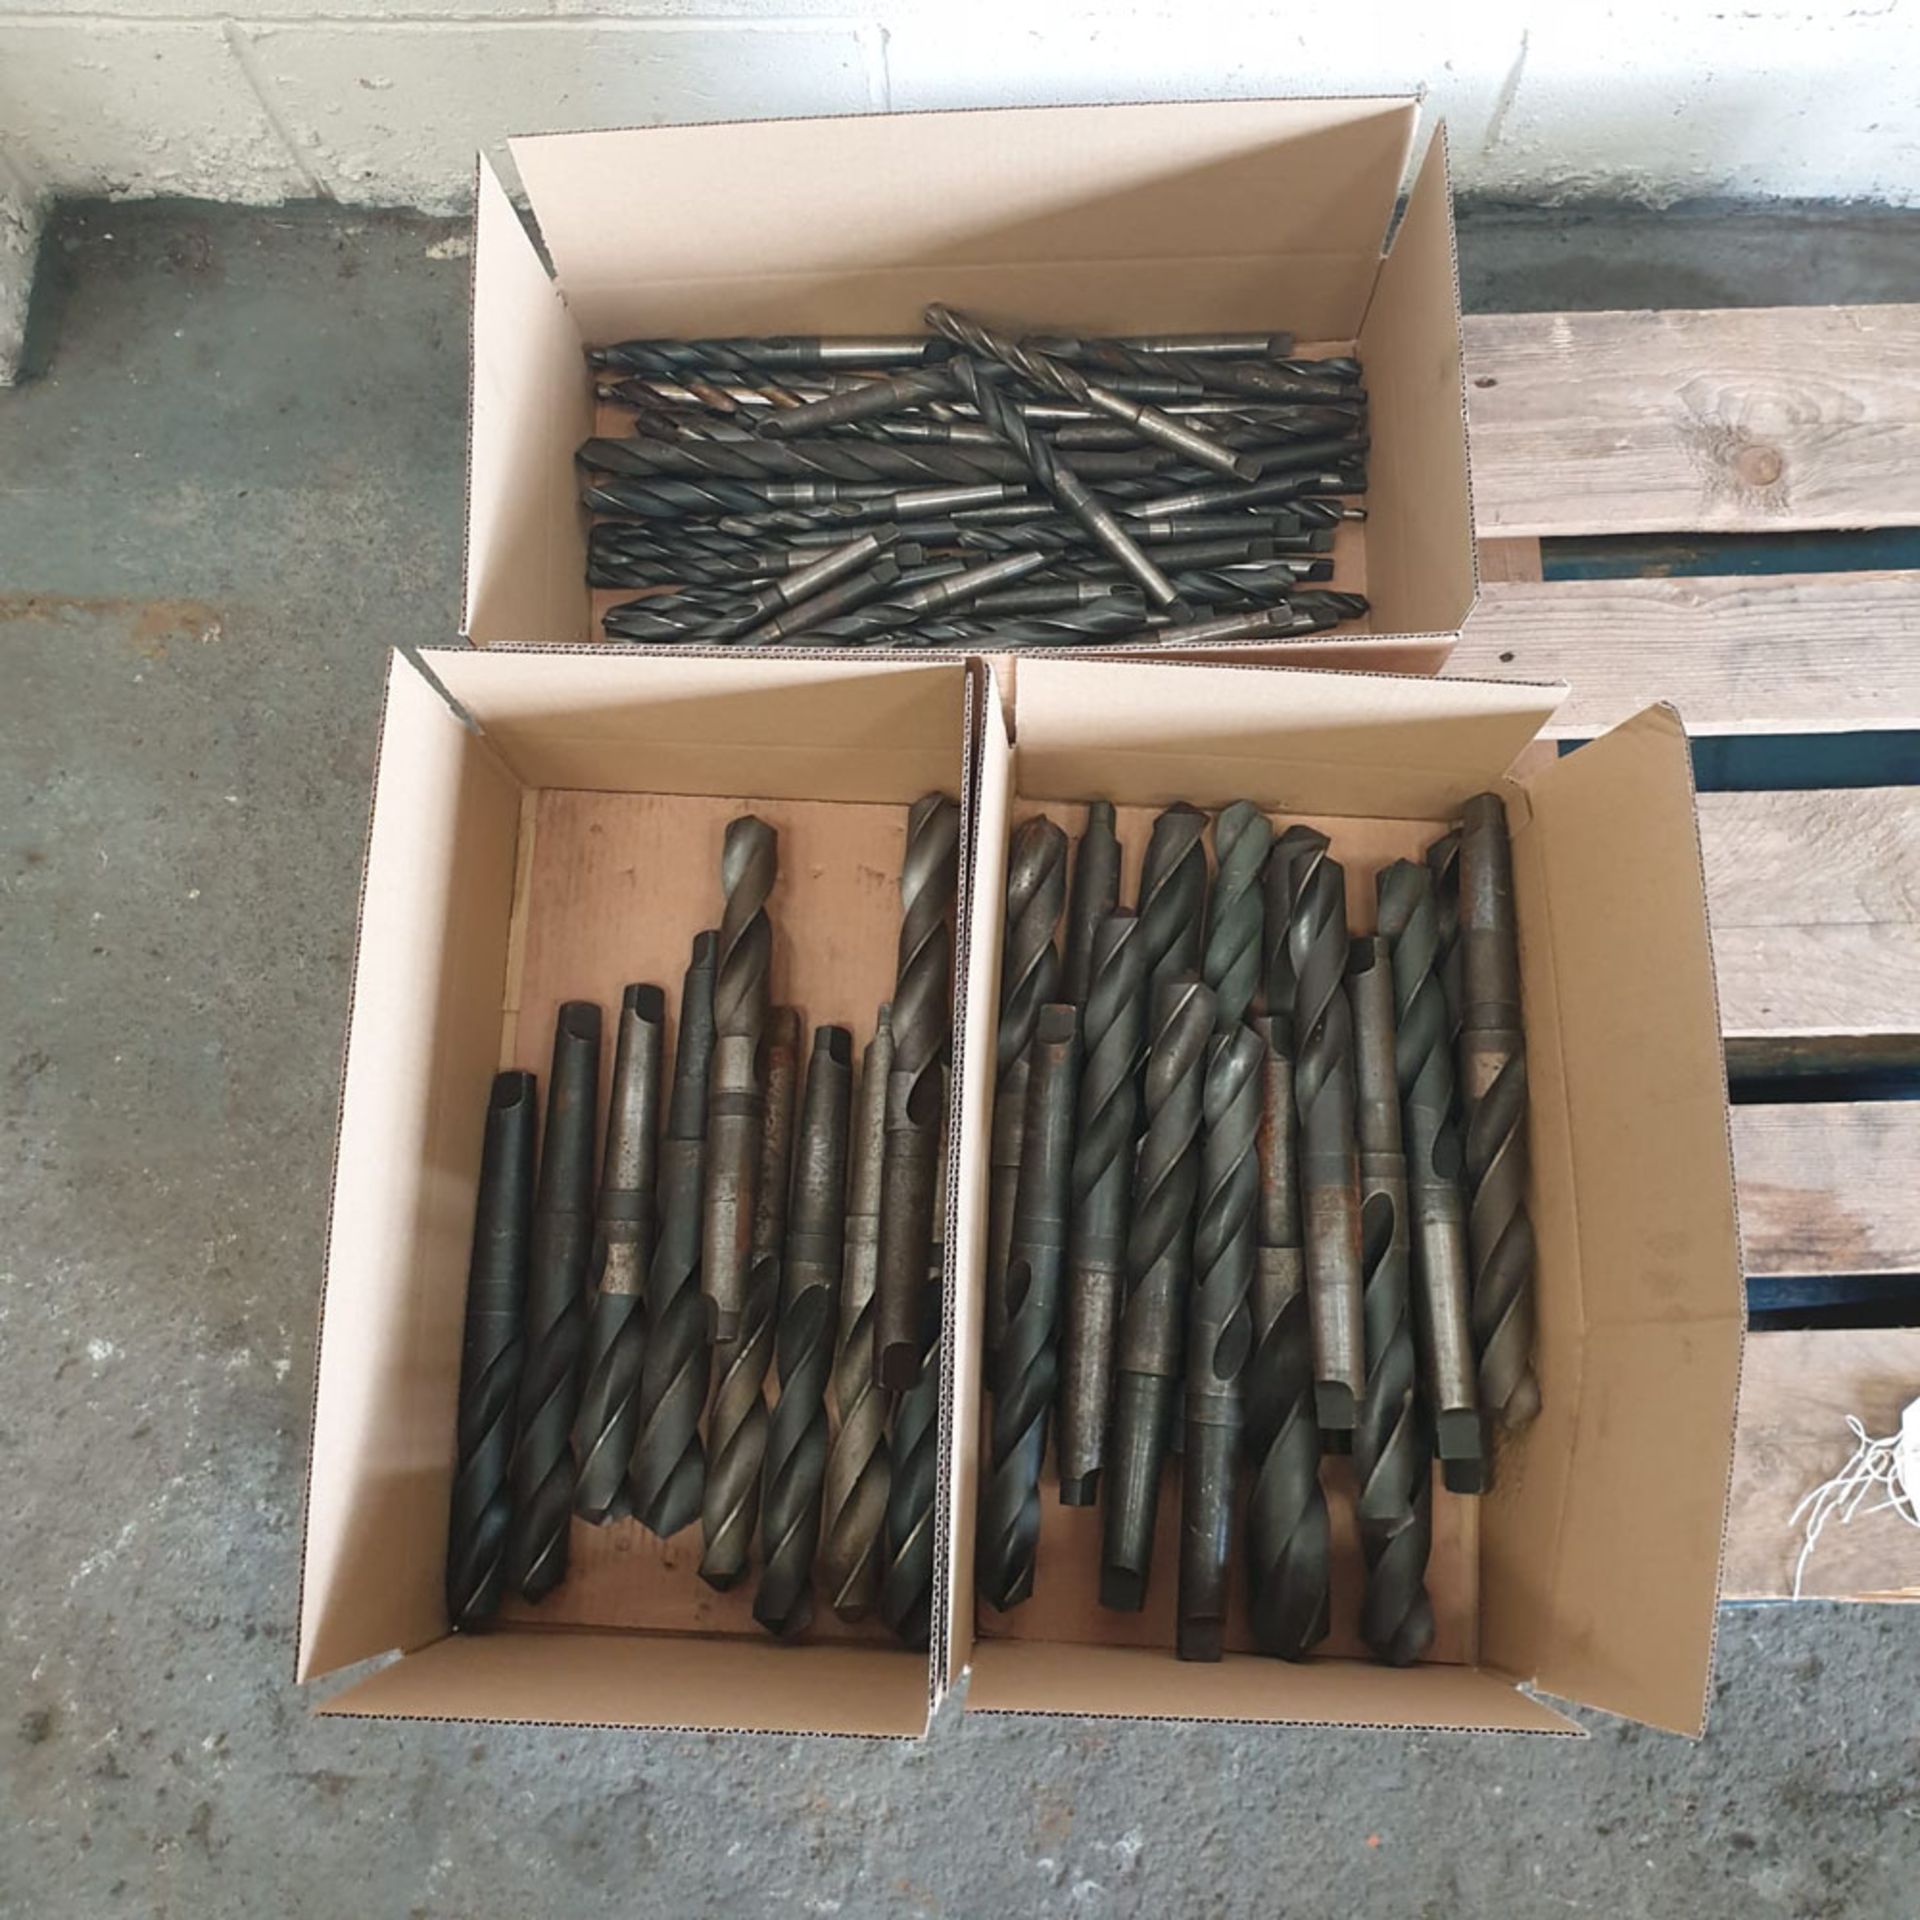 Quantity of Morse Taper Twist Drills as Lotted.